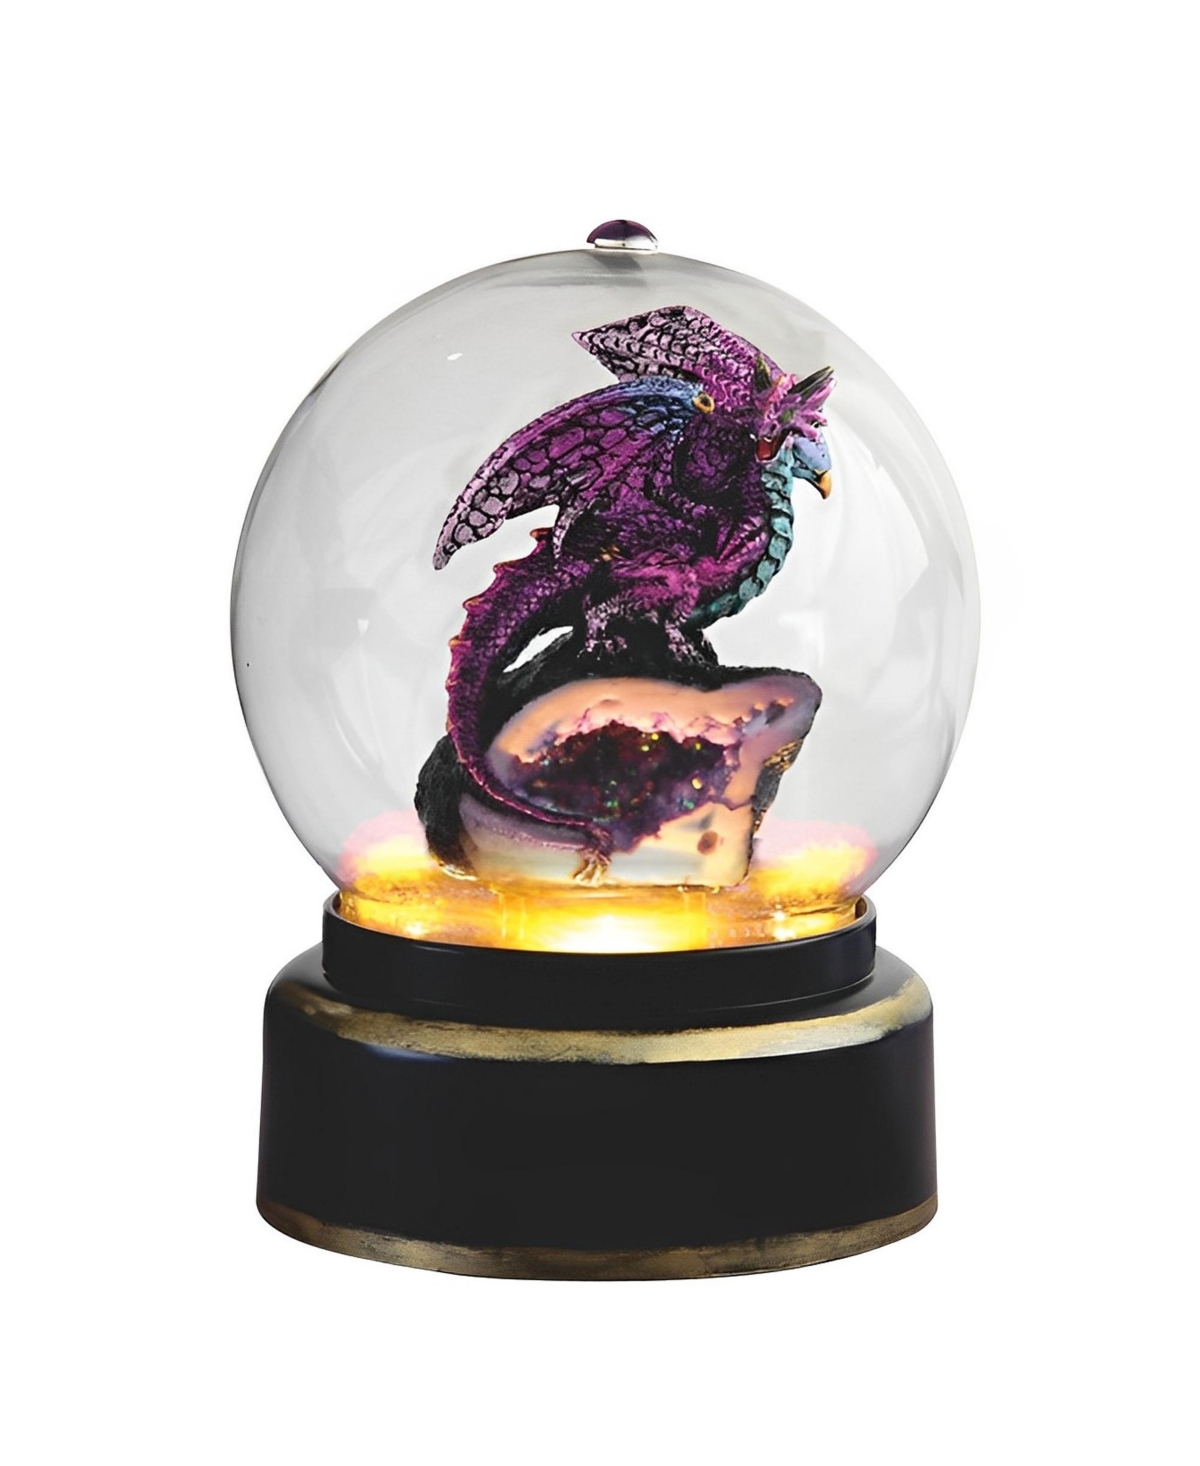 7.5"H Purple Dragon in Air Powered Snow Globe Home Decor Perfect Gift for House Warming, Holidays and Birthdays - Multicolor